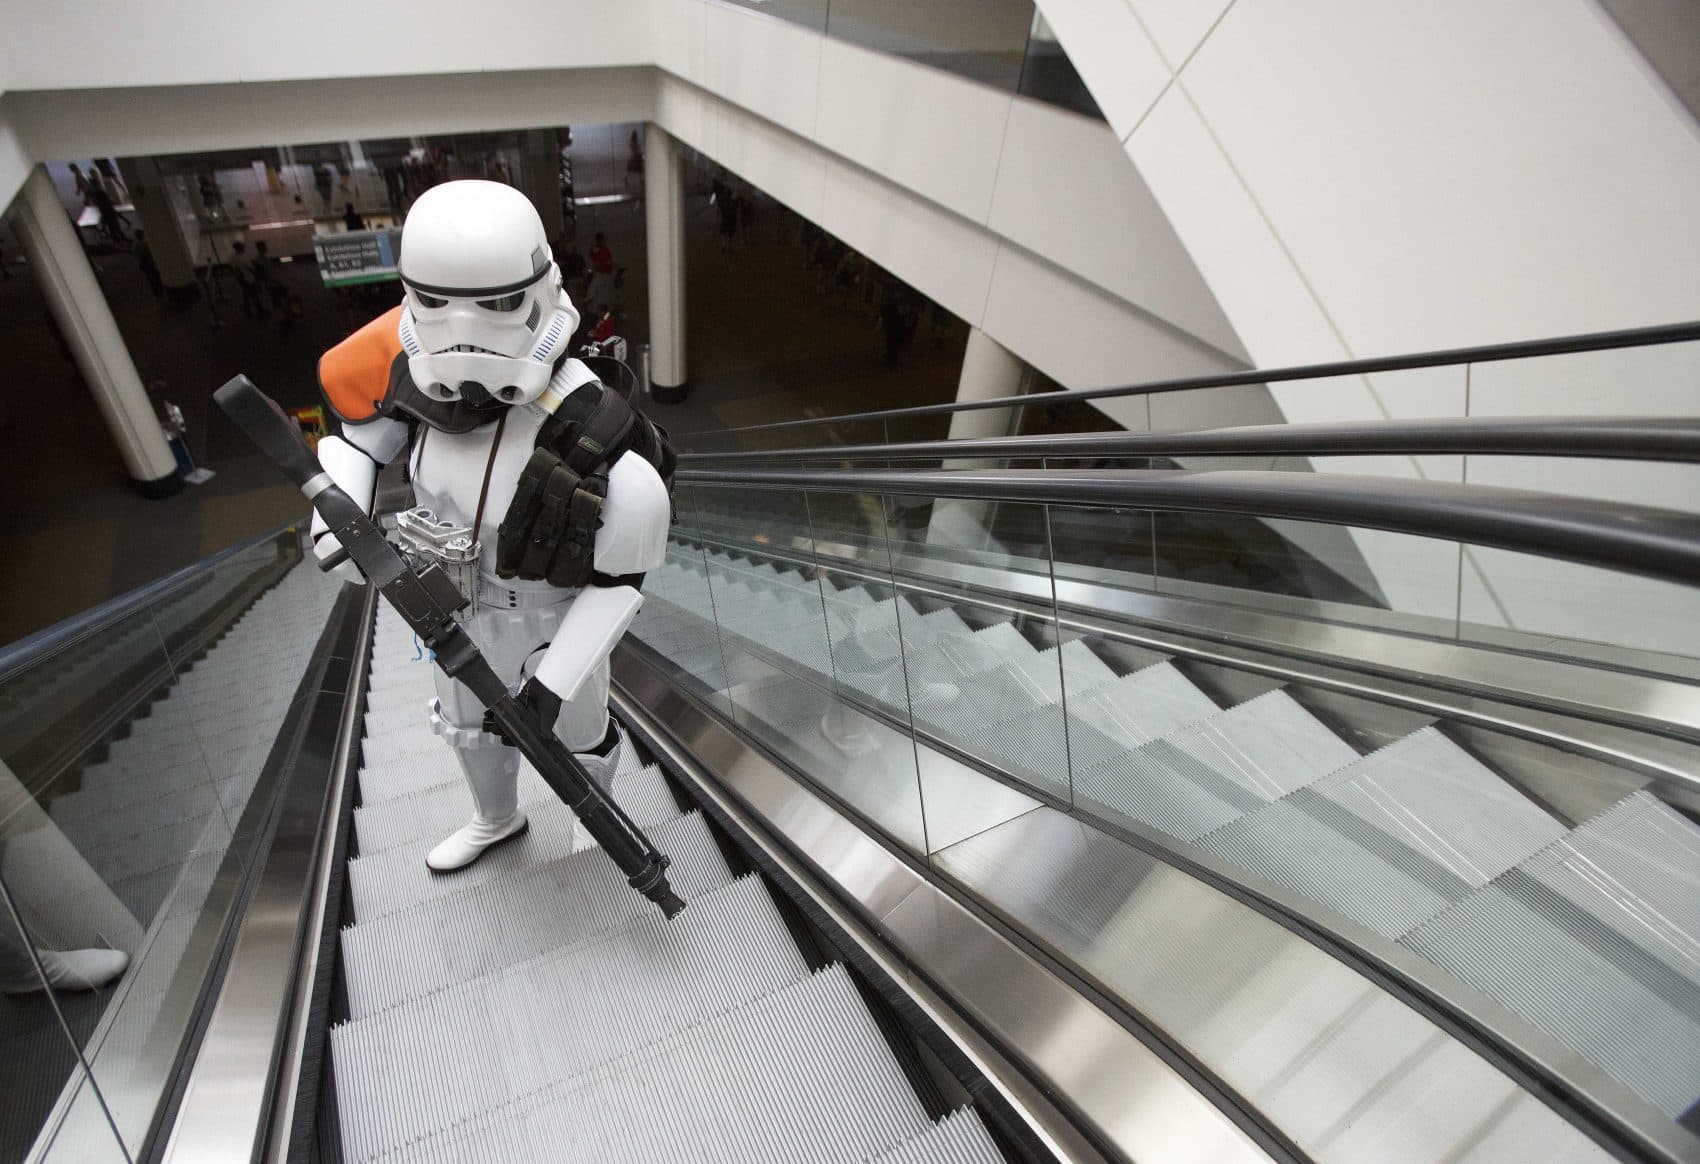 Heindrich Kuhlmann, of Brookline, Mass., rides an escalator dressed as a Star Wars stormtrooper on Friday. The convention was held at the Boston Convention & Exhibition Center through Sunday, August 13th. (AP Photo/Michael Dwyer)